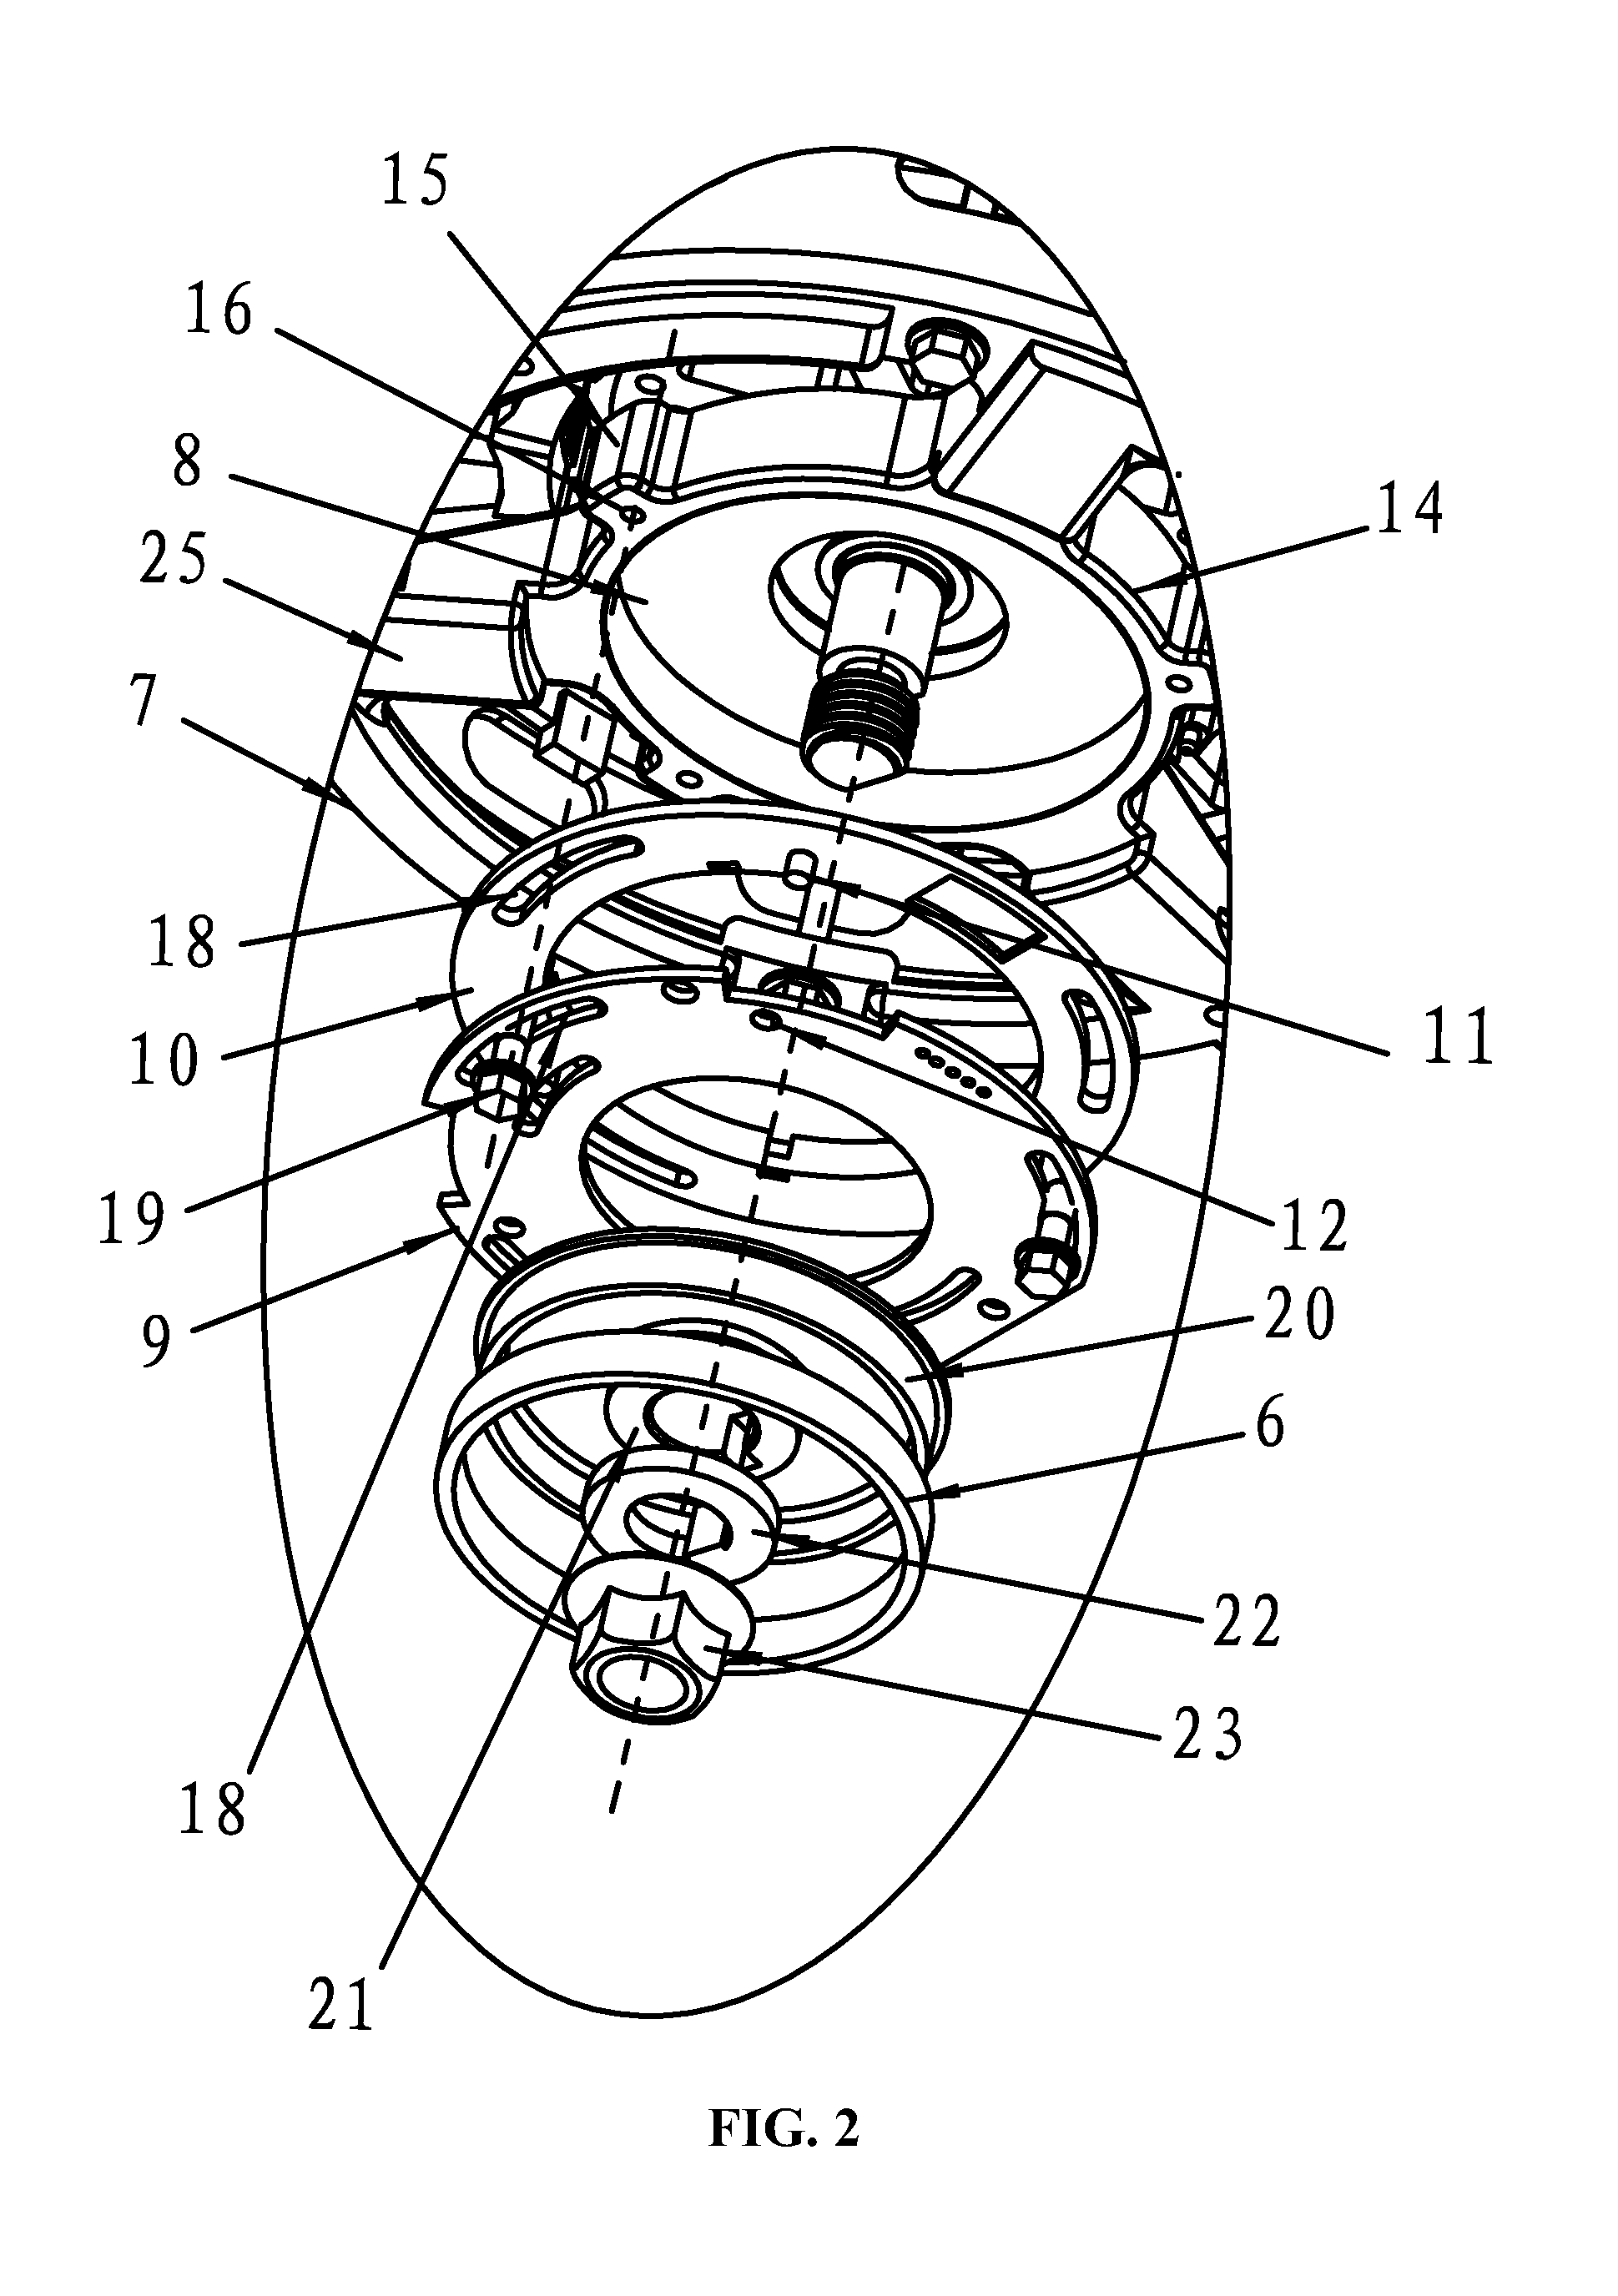 Brushless DC motor having structures for mounting a hall element and a magnetic ring outside a motor casing